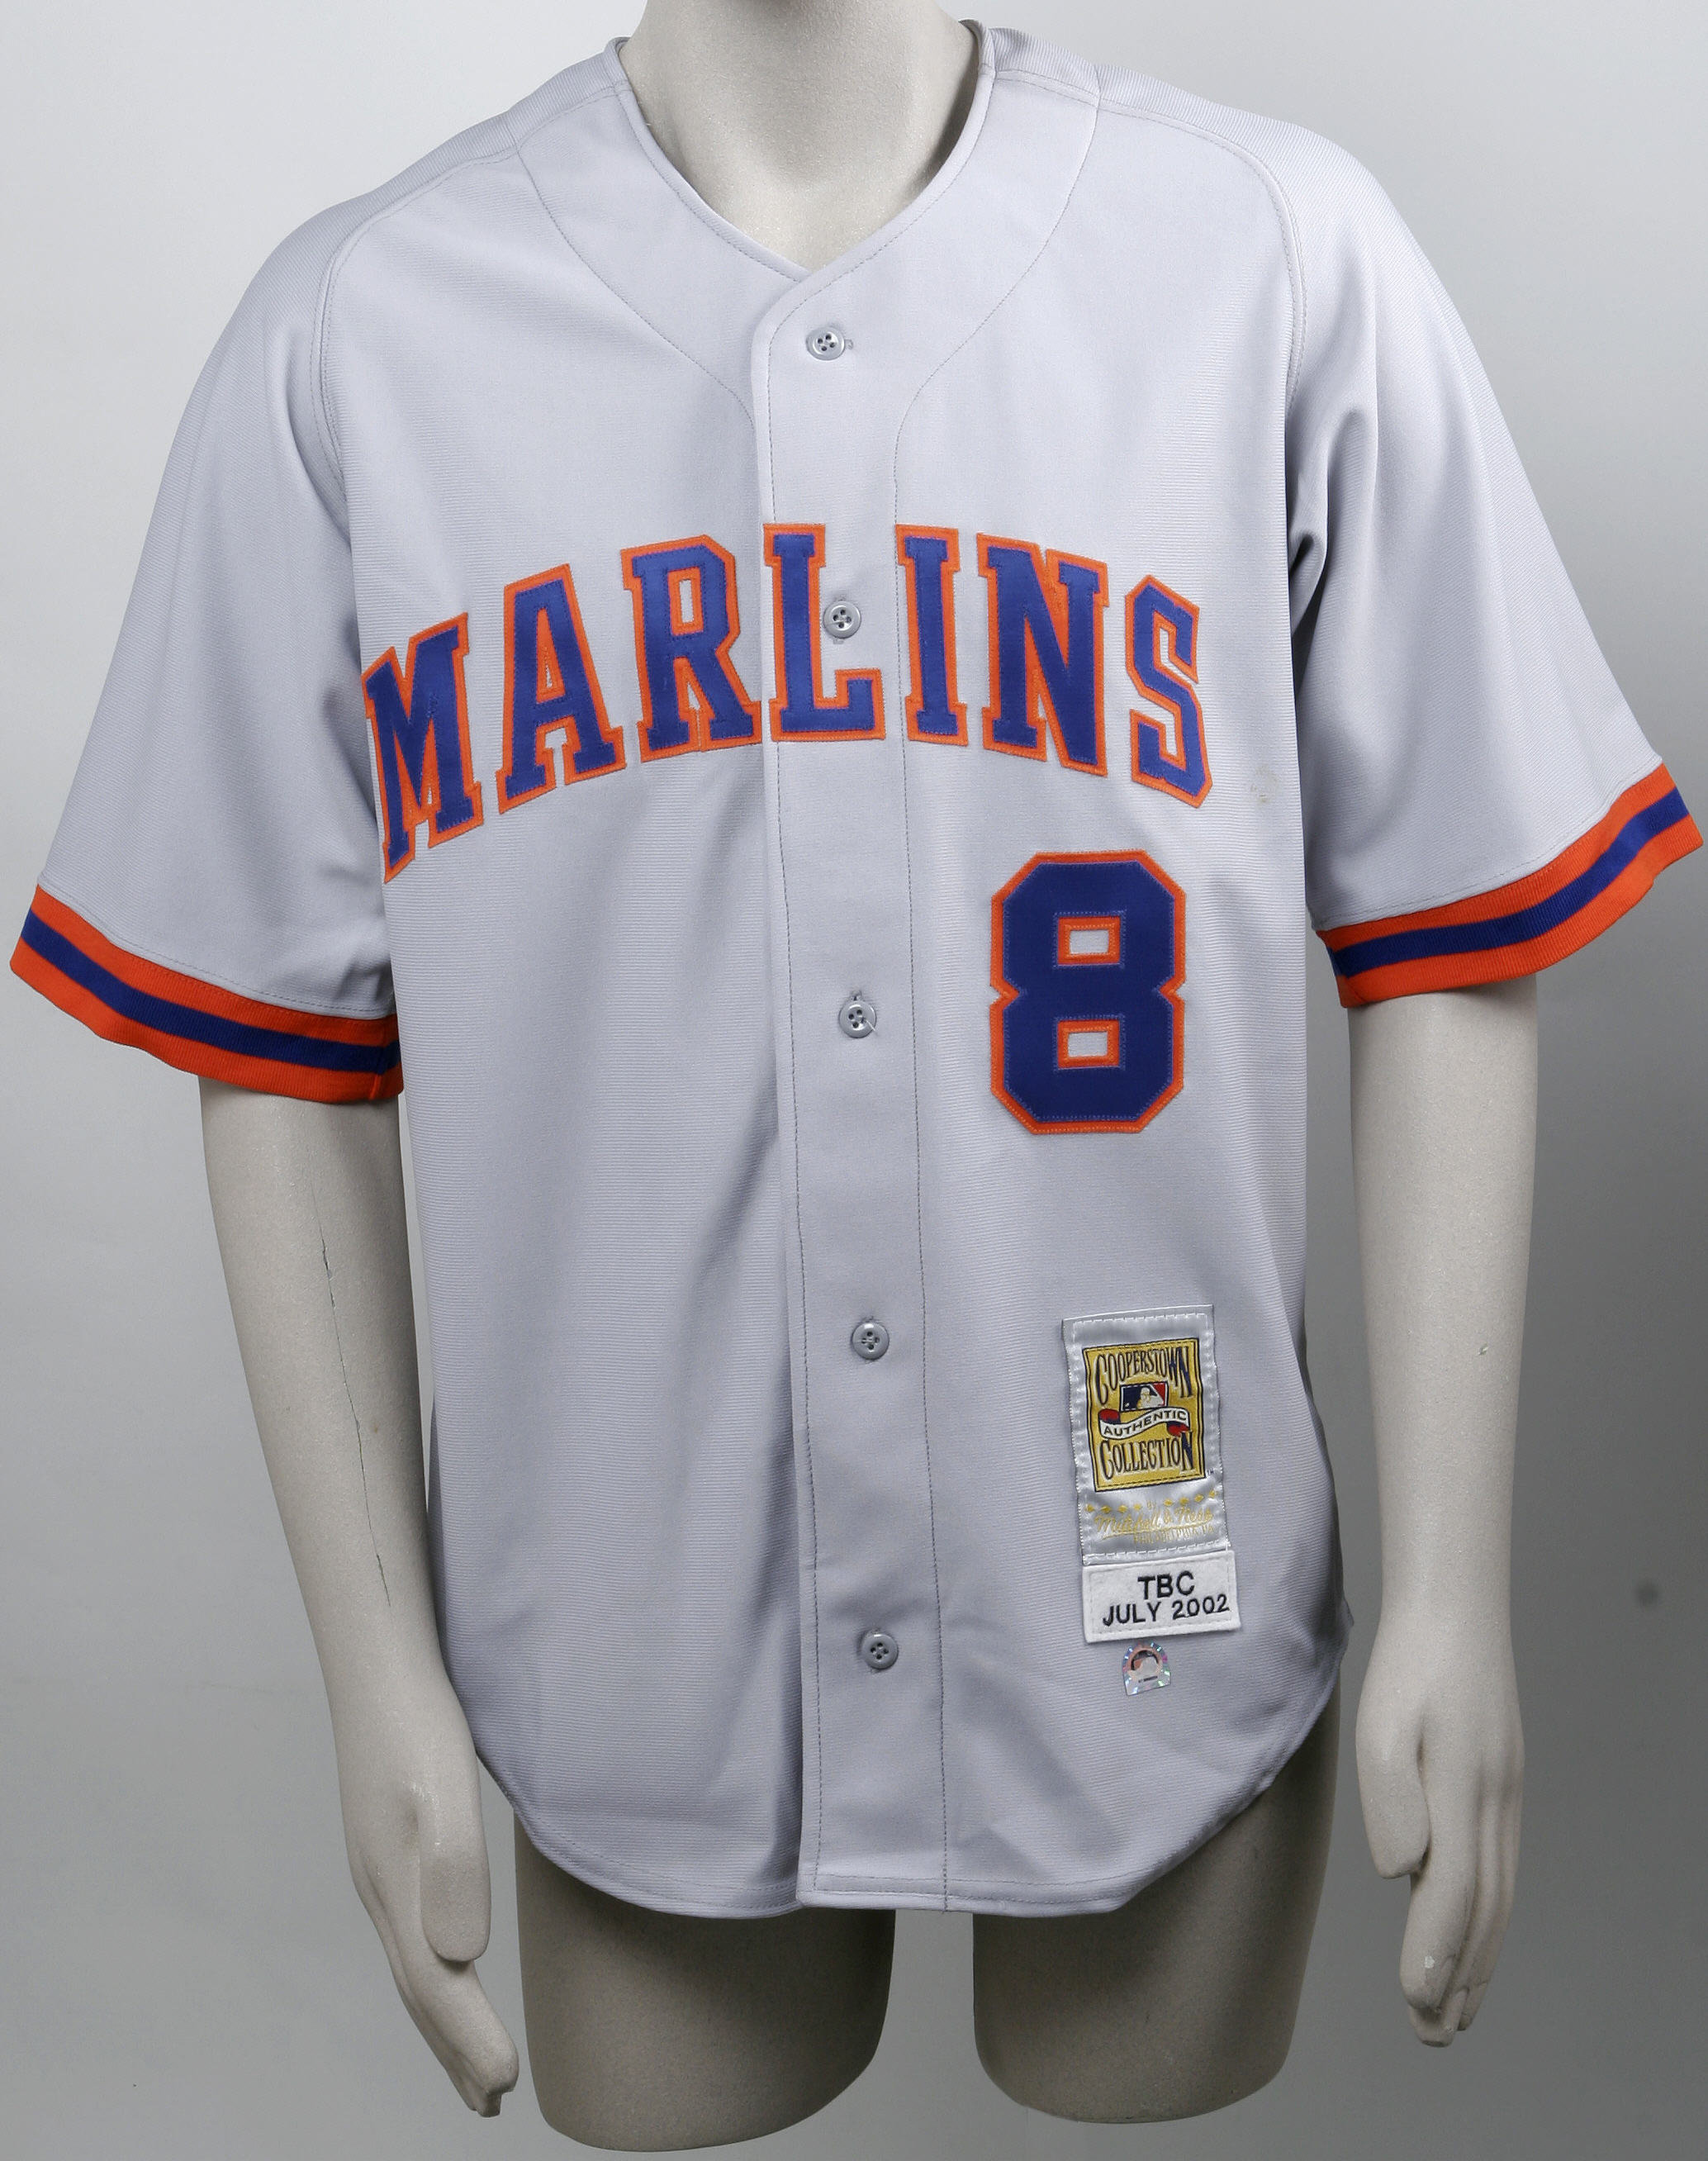 Baseballer - The Miami Marlins throwback uniforms are absolutely insane.  They should've never replaced these uniforms 🔥